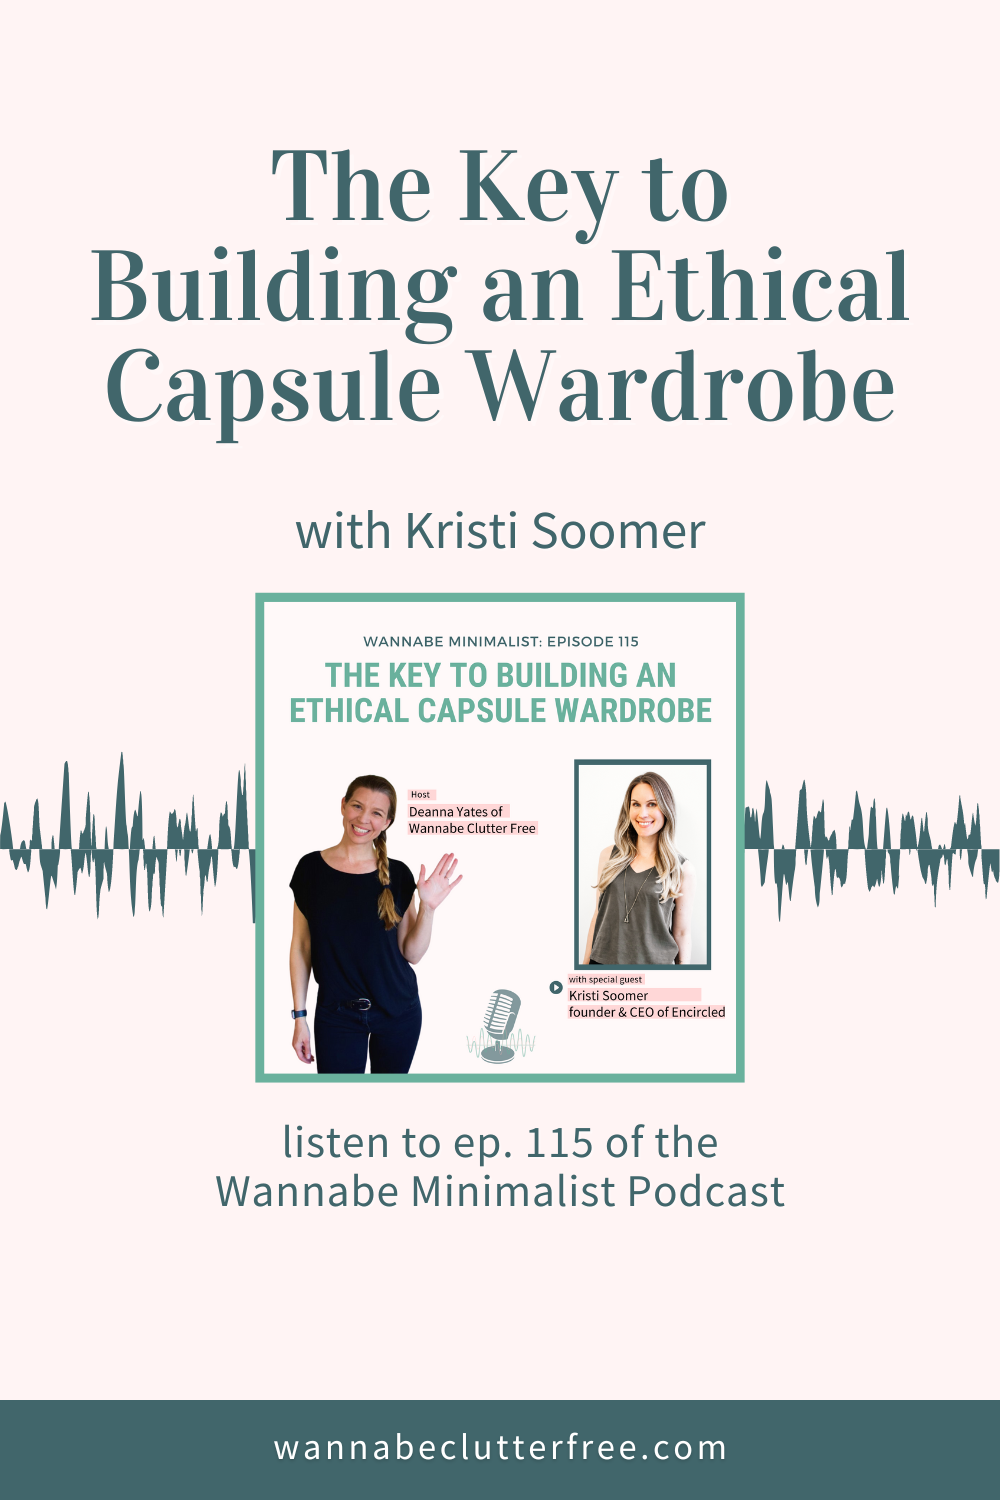 The key to building an ethical capsule wardrobe